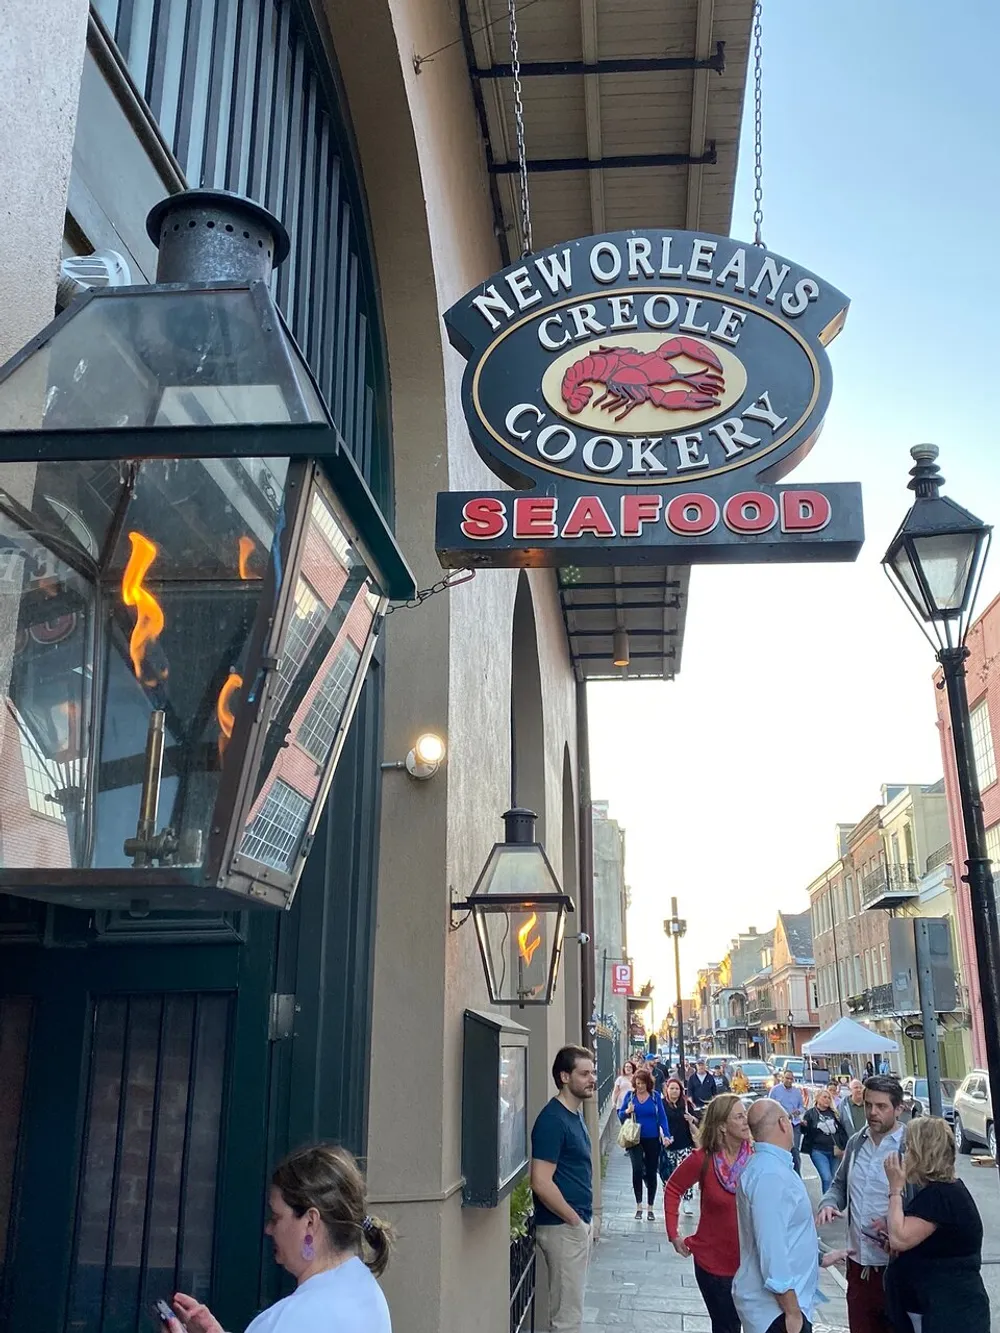 The image shows a bustling street scene with pedestrians and a prominent sign for the New Orleans Creole Cookery Seafood restaurant highlighting the areas culinary offerings